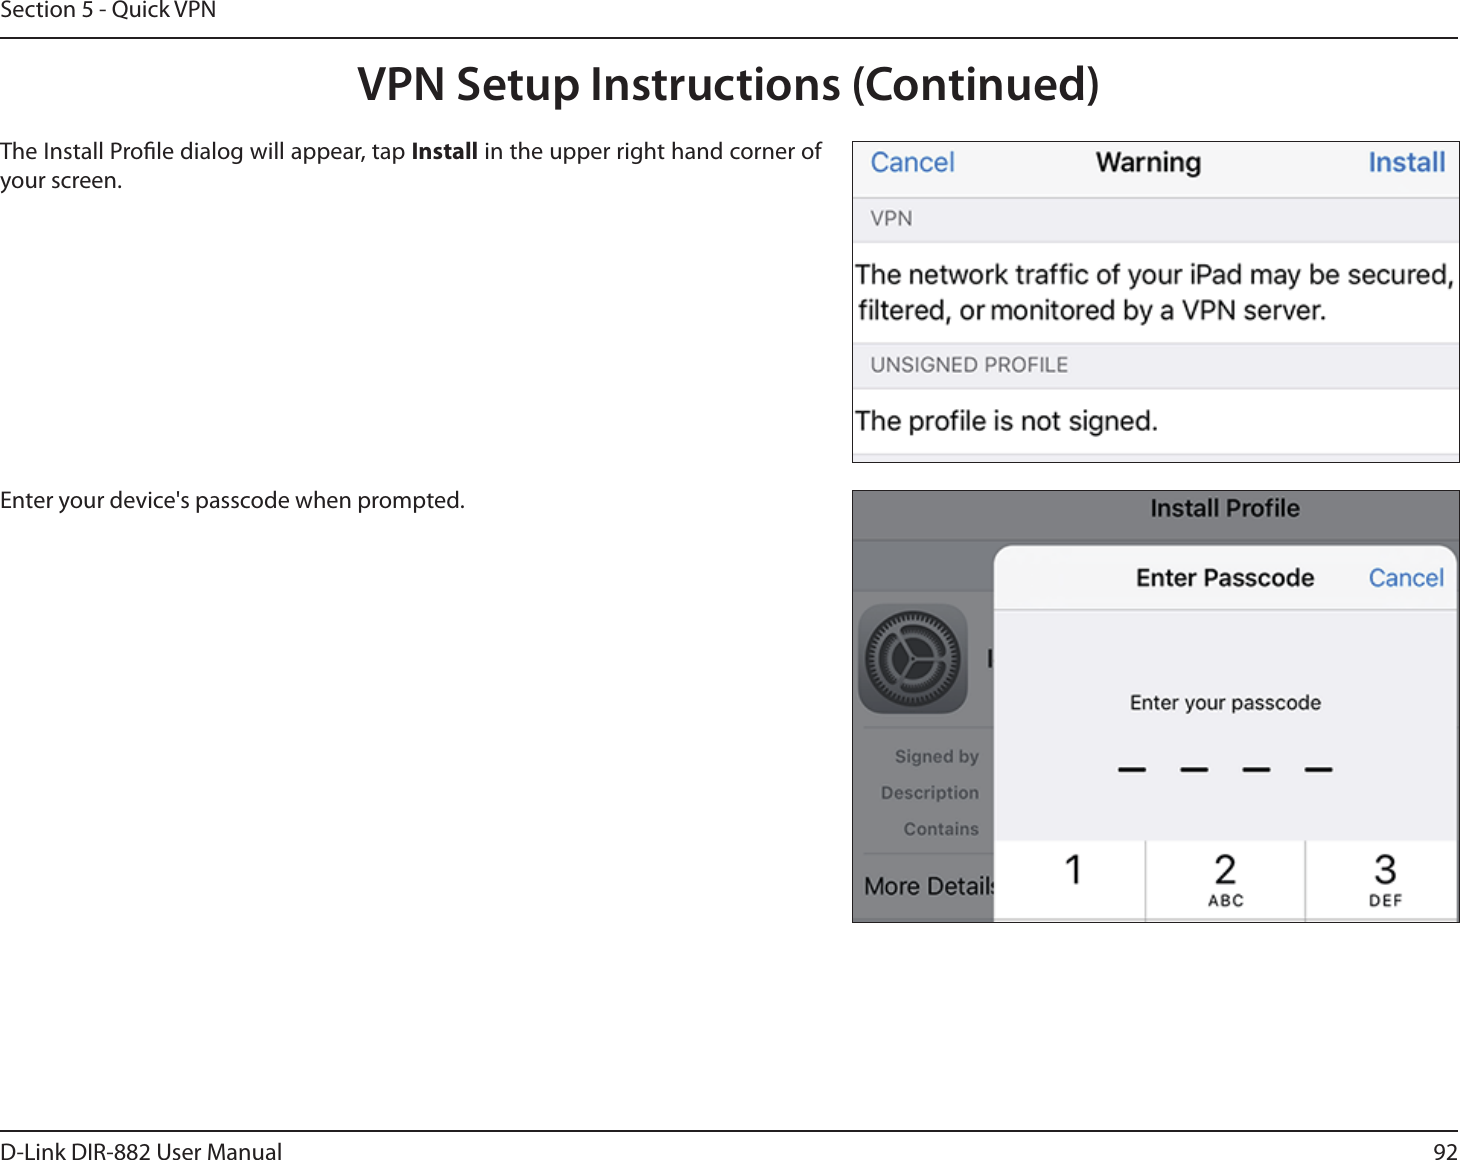 92D-Link DIR-882 User ManualSection 5 - Quick VPNThe Install Prole dialog will appear, tap Install in the upper right hand corner of your screen.Enter your device&apos;s passcode when prompted. VPN Setup Instructions (Continued)